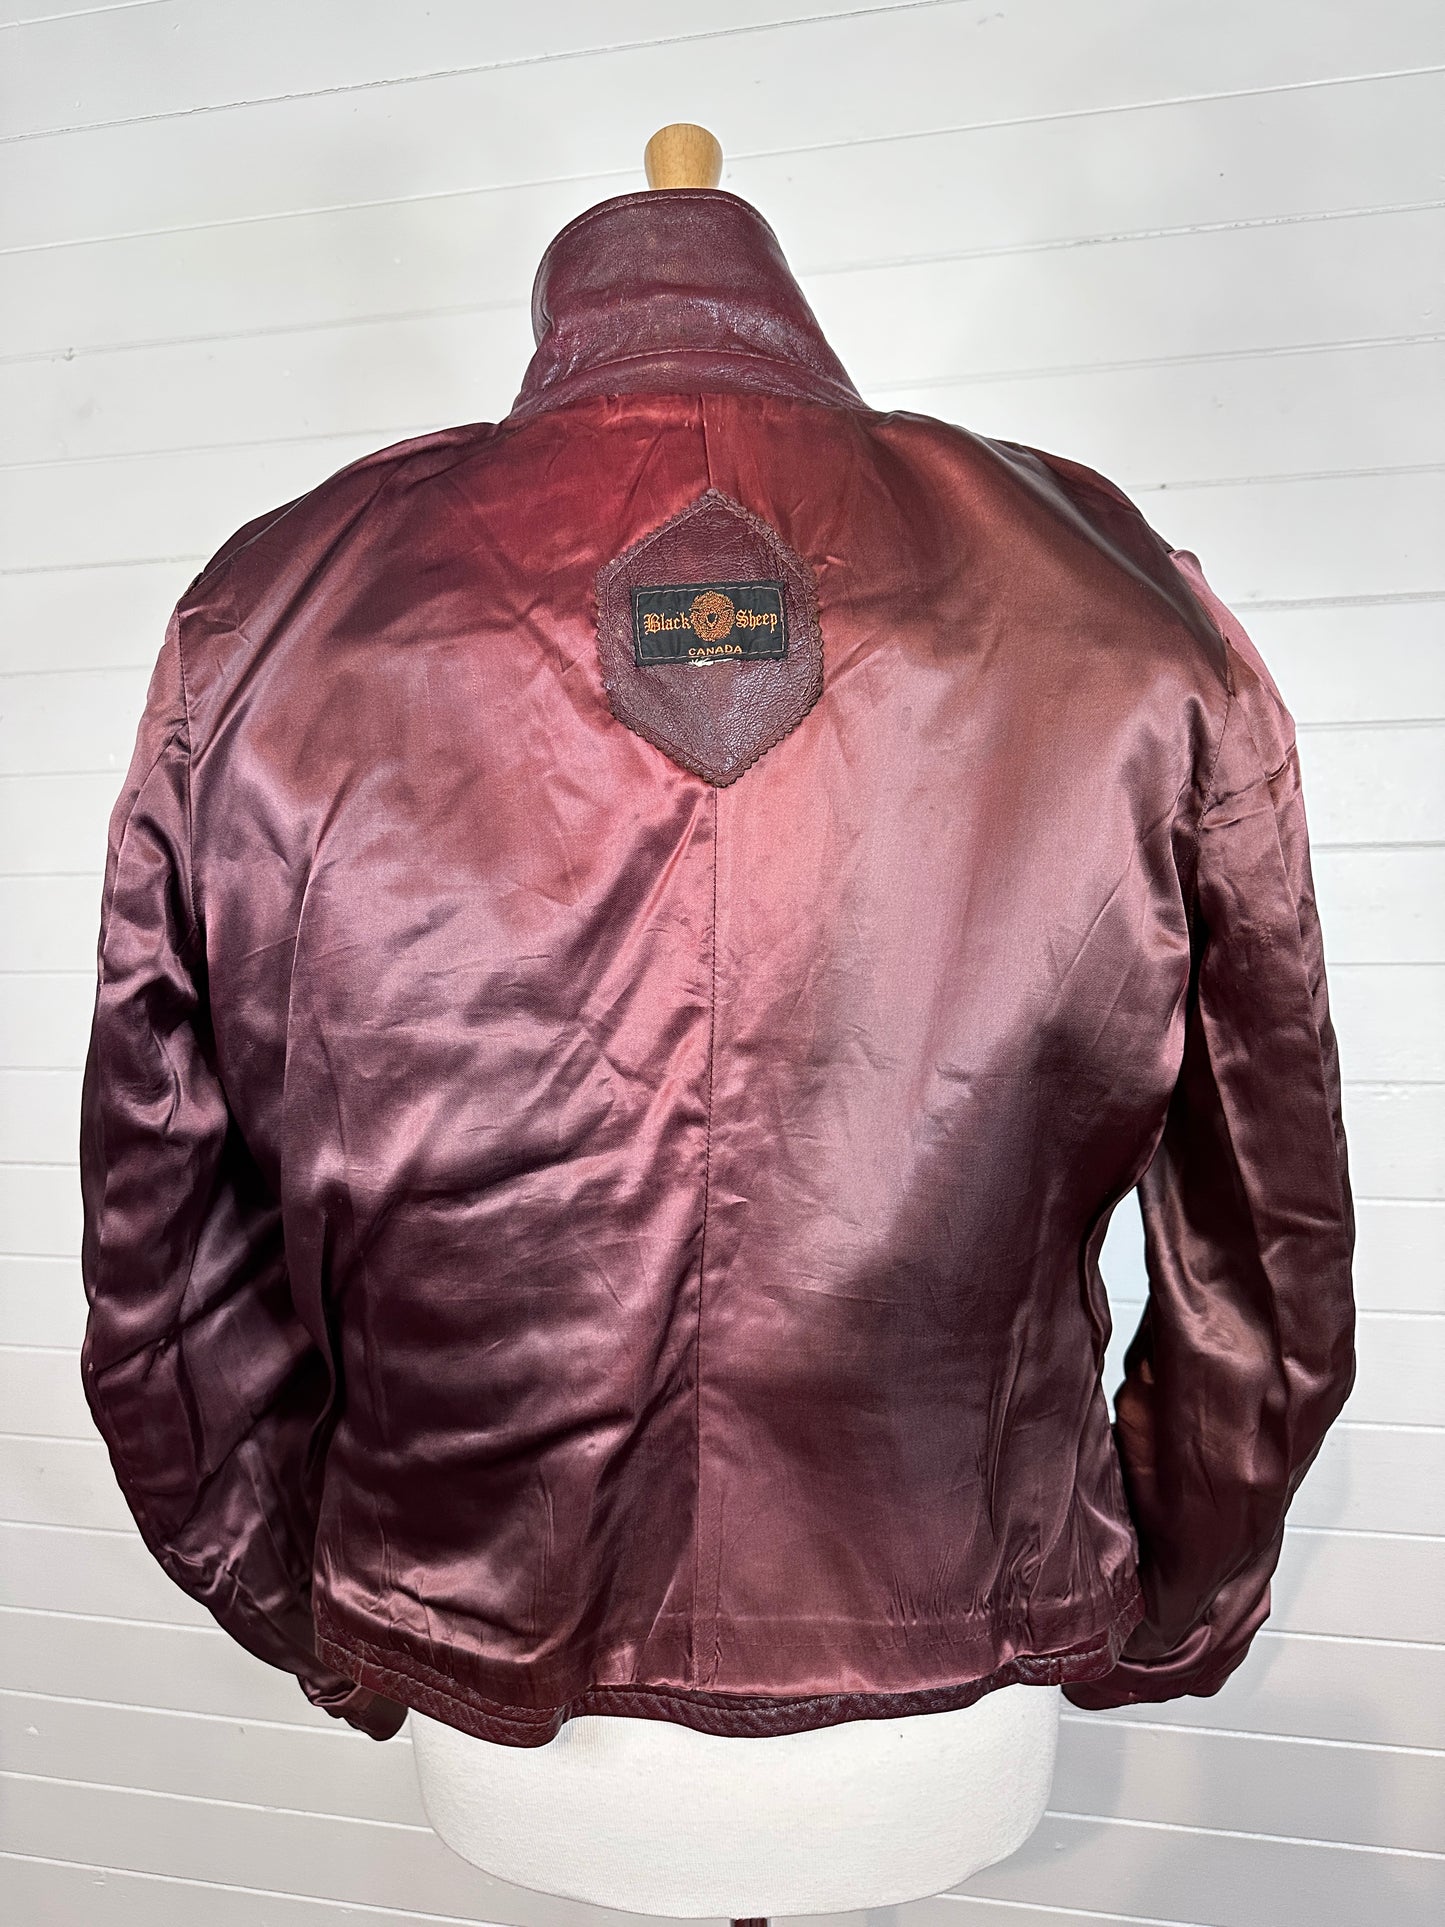 1970's Oxblood Fitted Leather Jacket - MINTY!